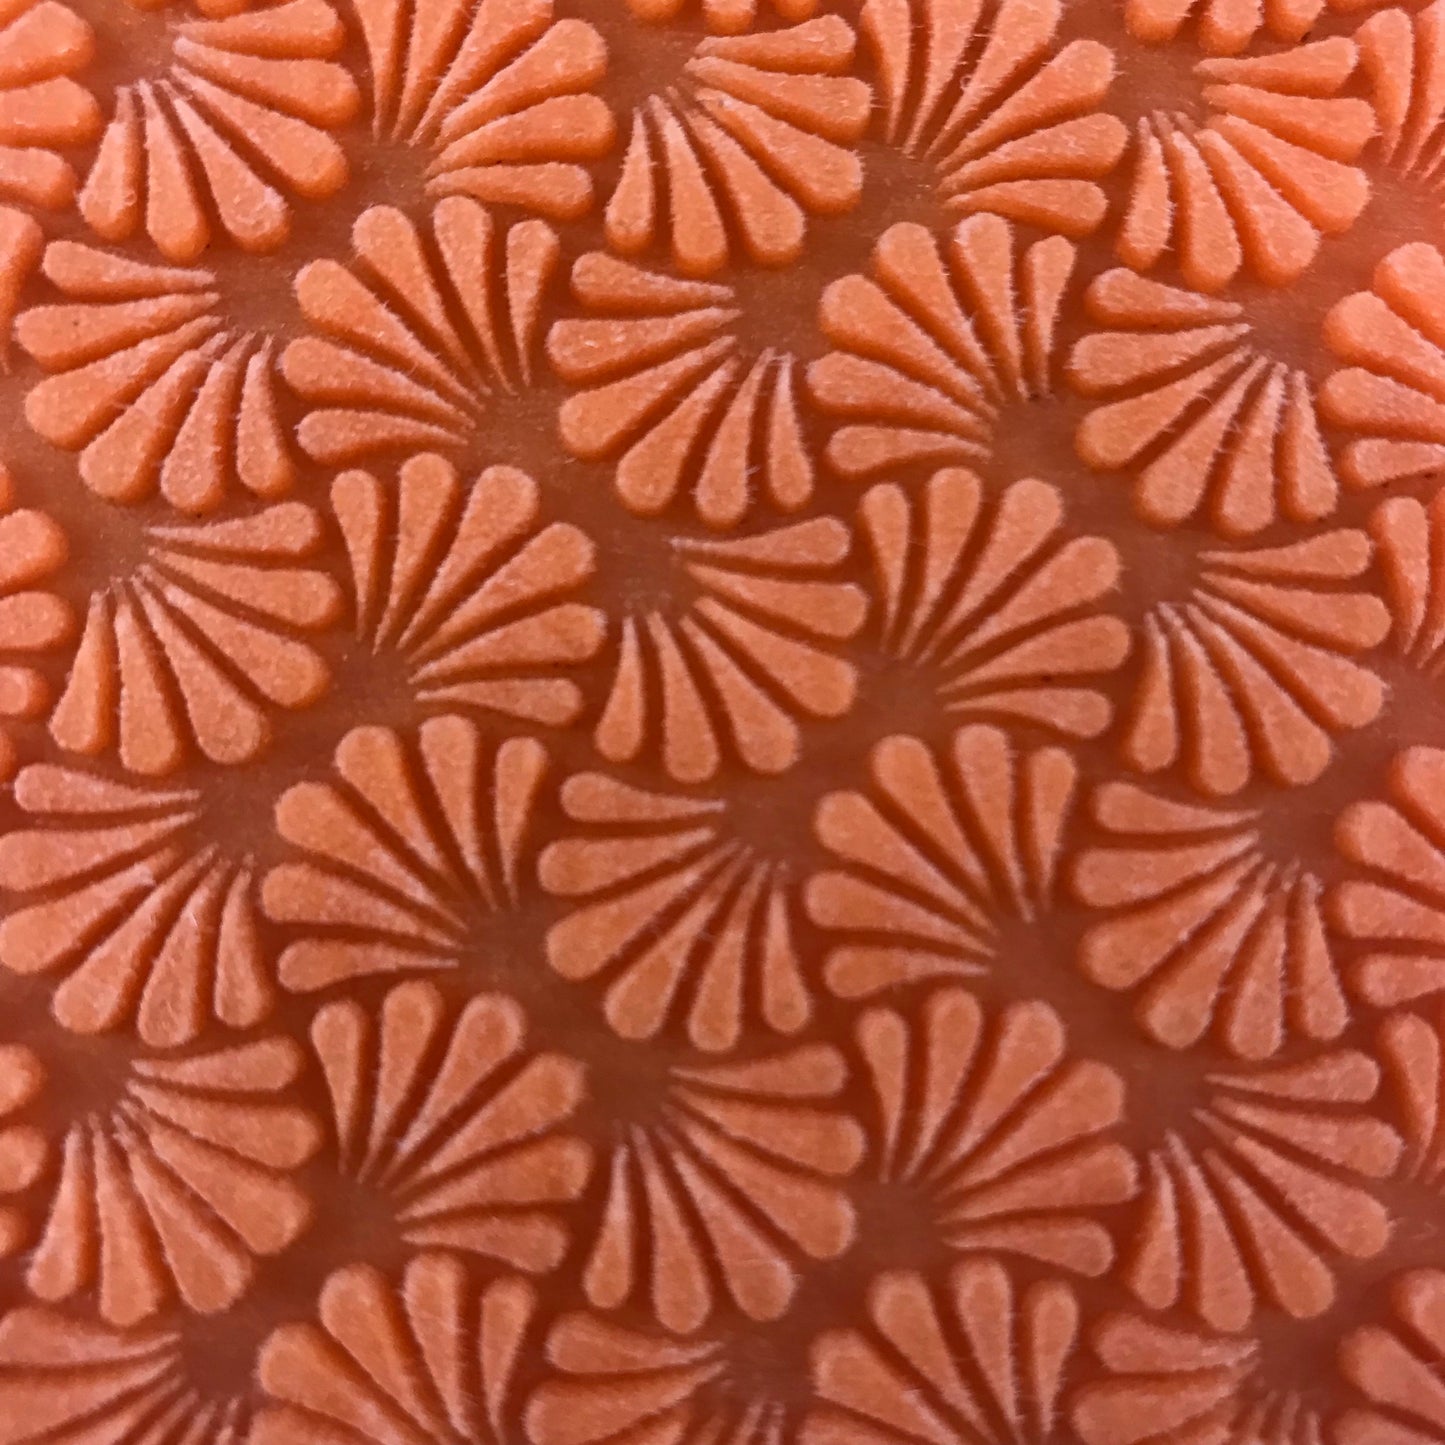 Scalloped Fan Texture Mat Silicone rubber Stamp for polymer clay paper Gelli plate and resin